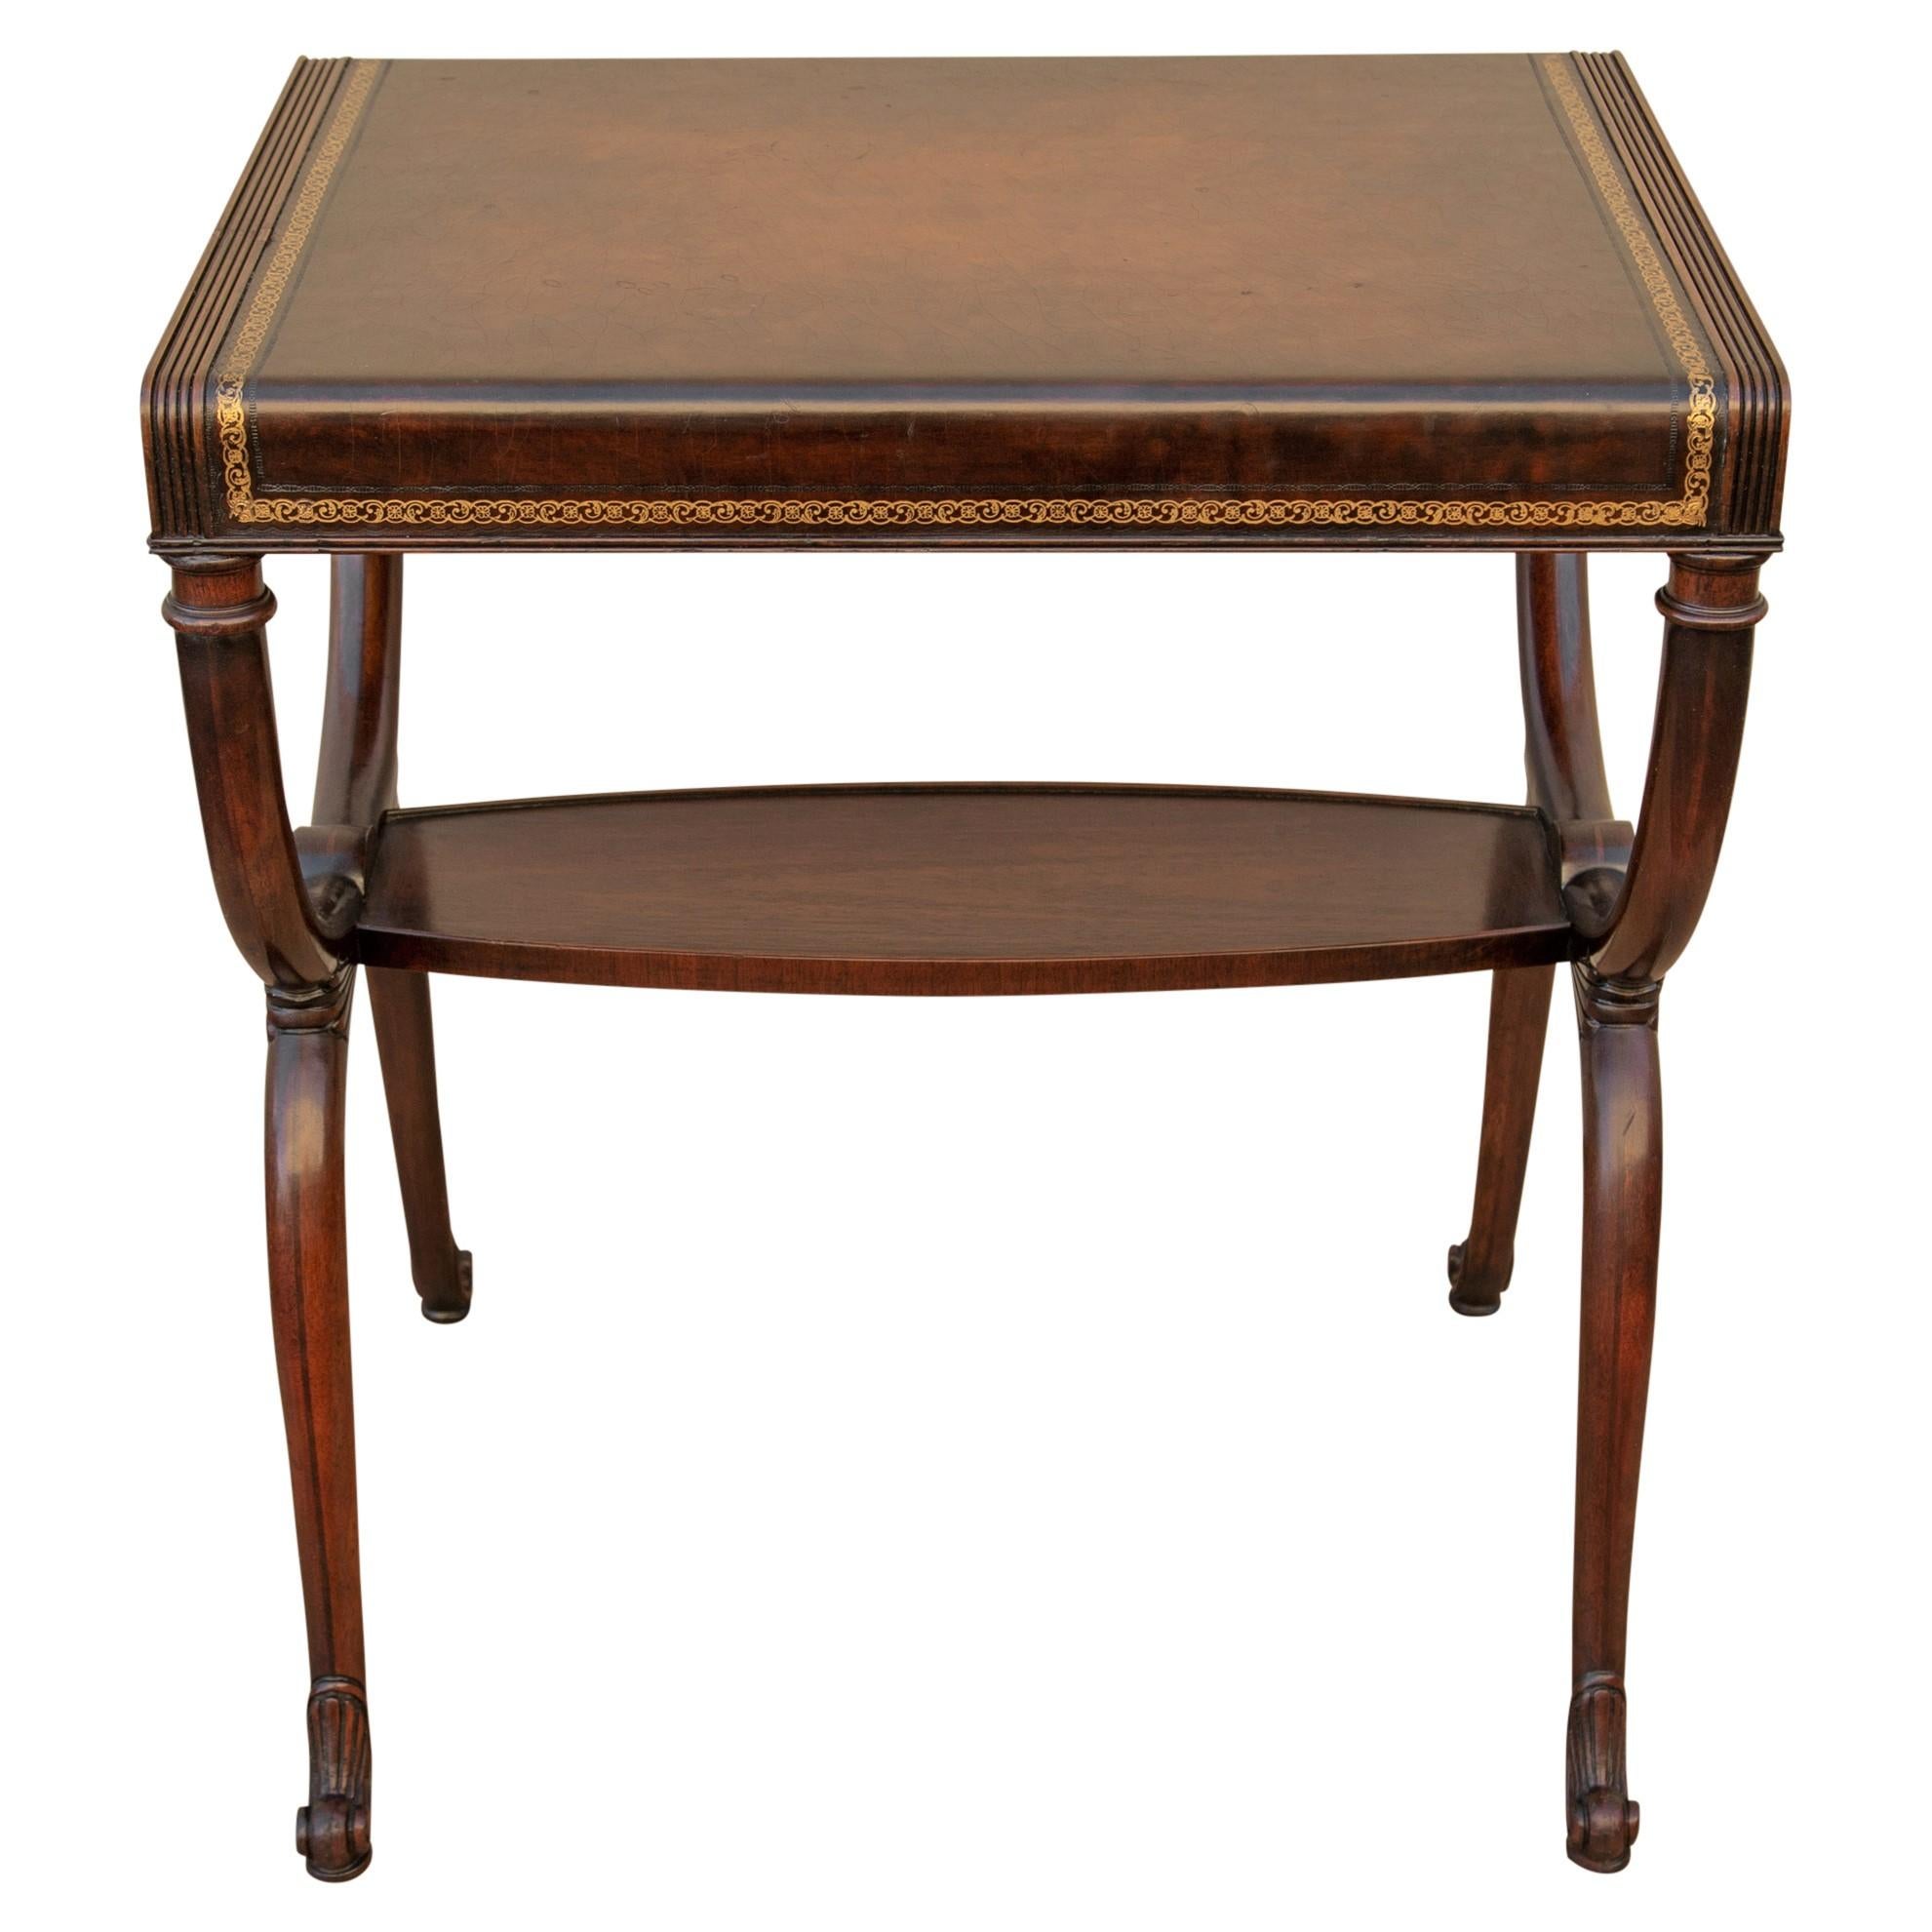 Regency style mahogany and leather foyer or end table with Curule legs by Weiman, circa 1950s. It has a tooled and gilded leather top, curved legs with brass ring lion head hardware, reeded sides above flame mahogany aprons and carved escargot feet.